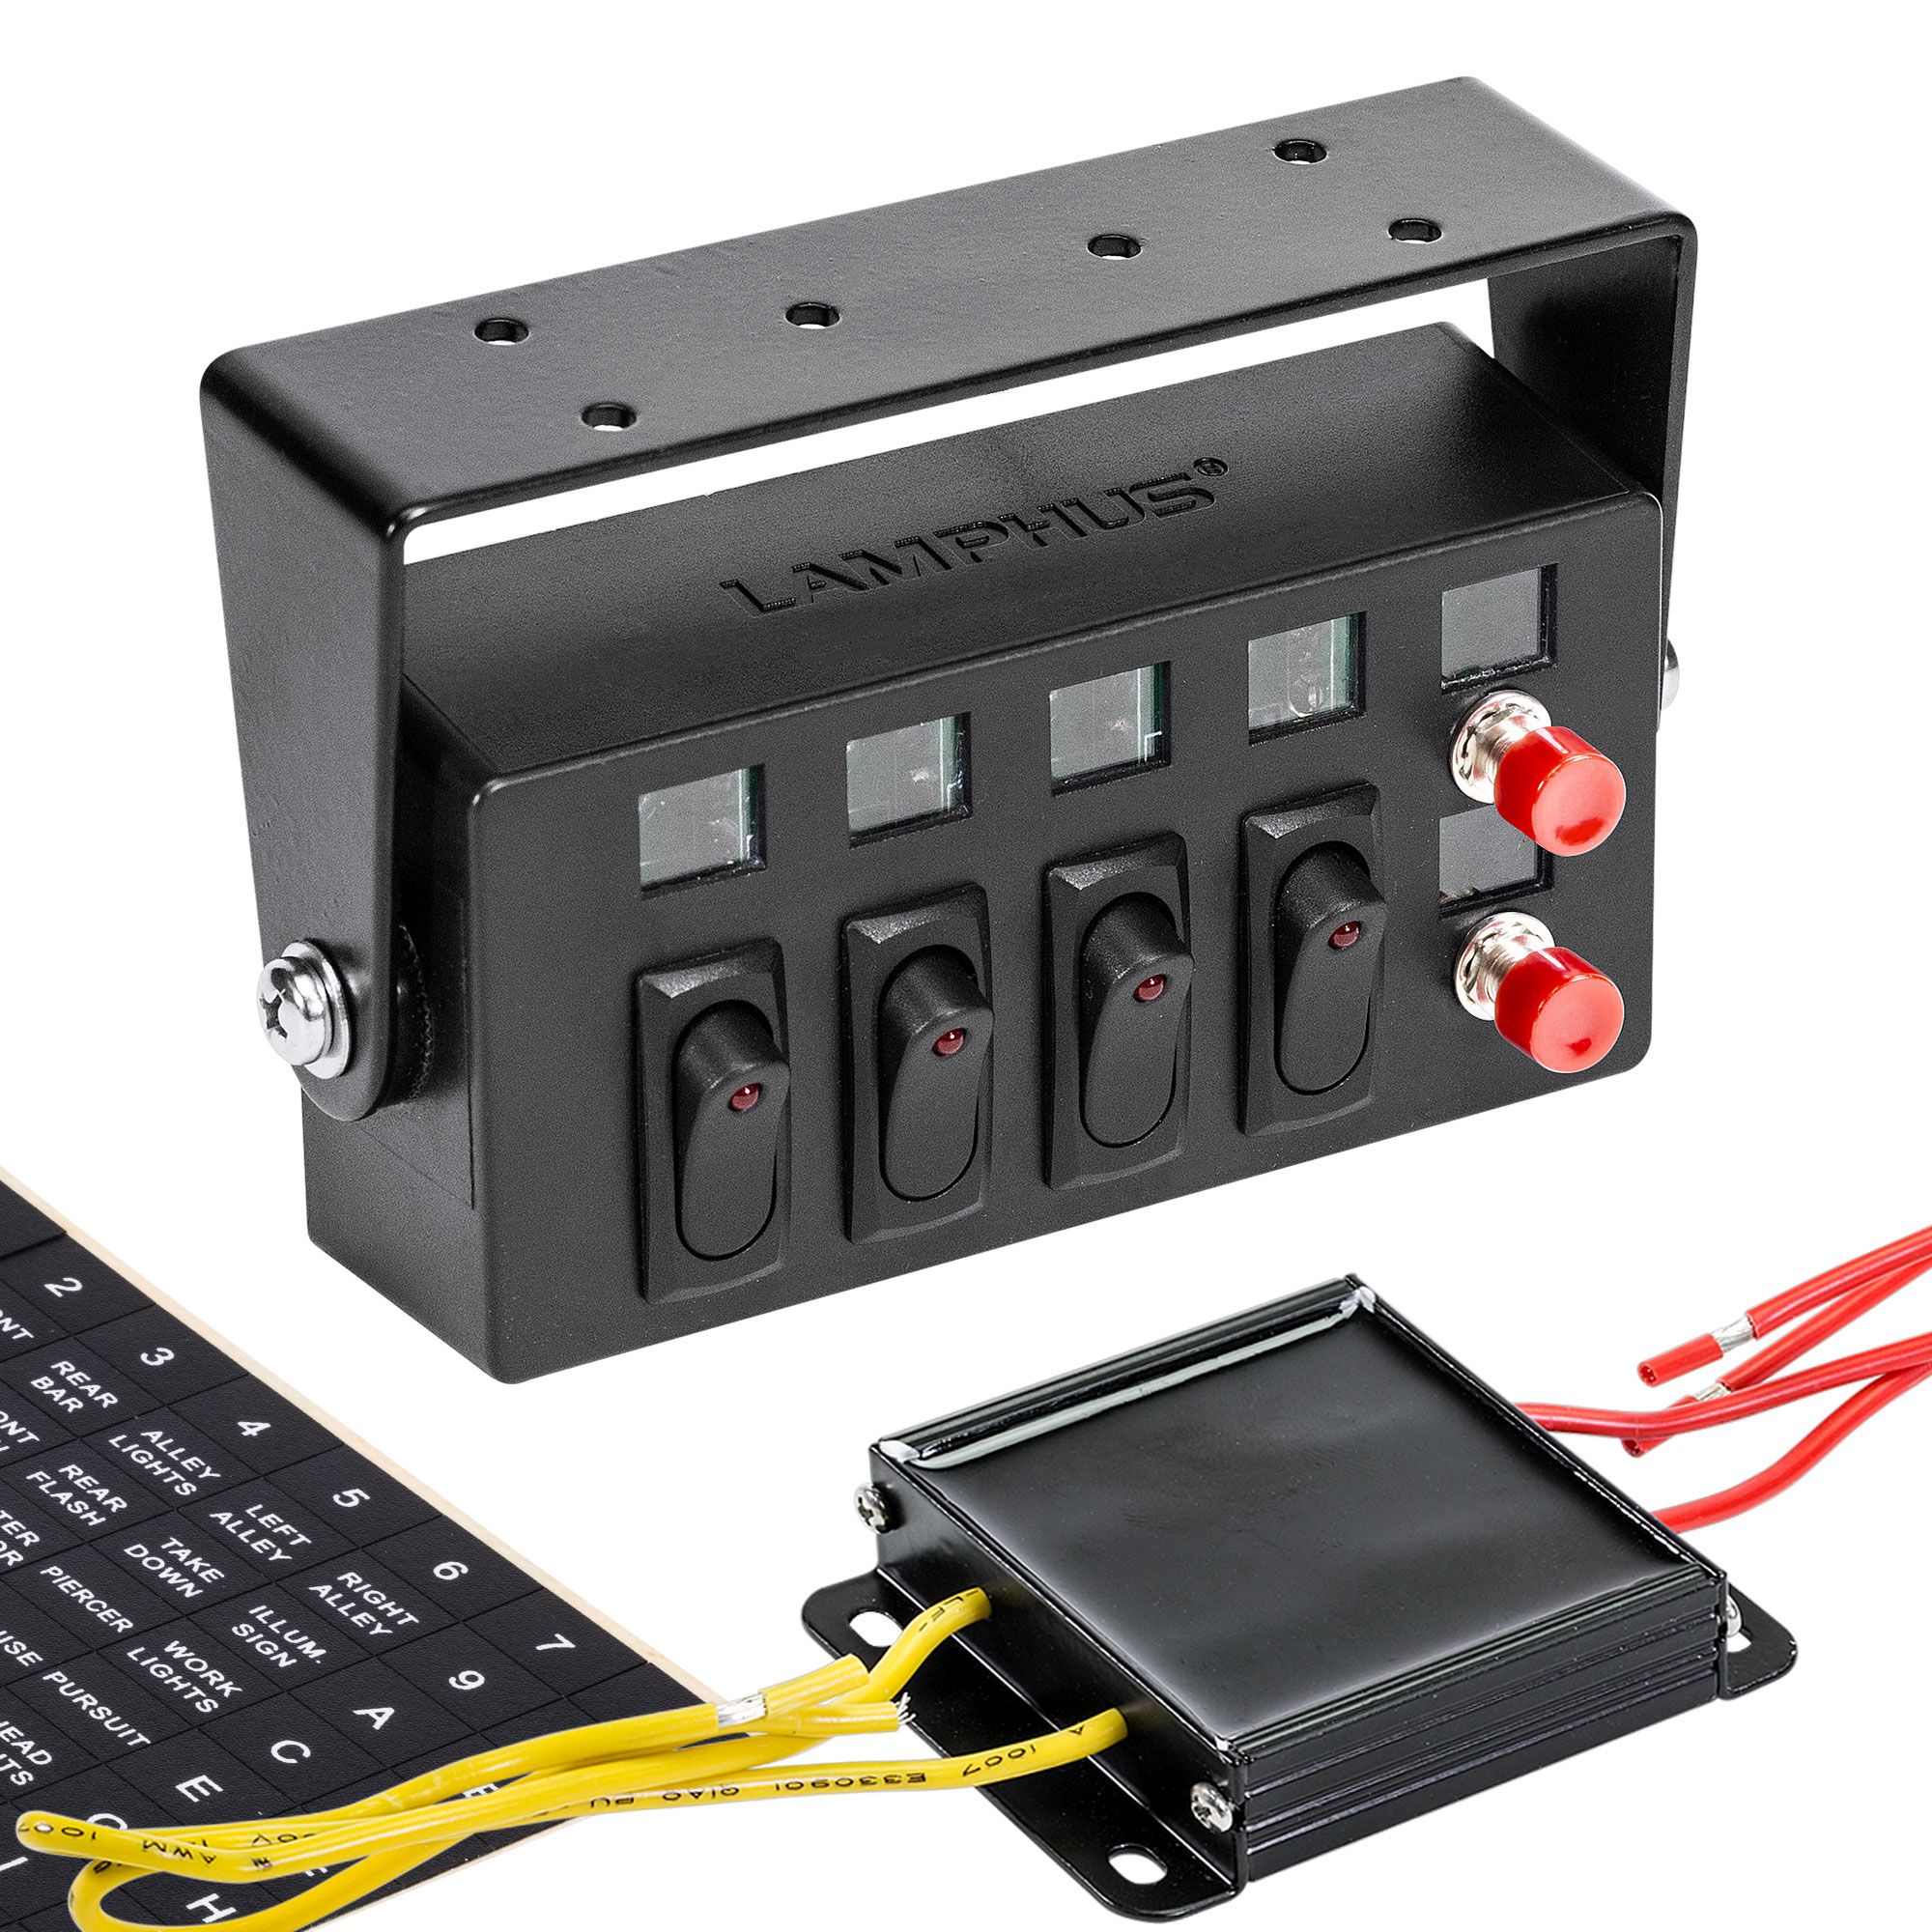 Switch Box w/ 4 ON/OFF Rocker Switches and 2 Momentary Switches